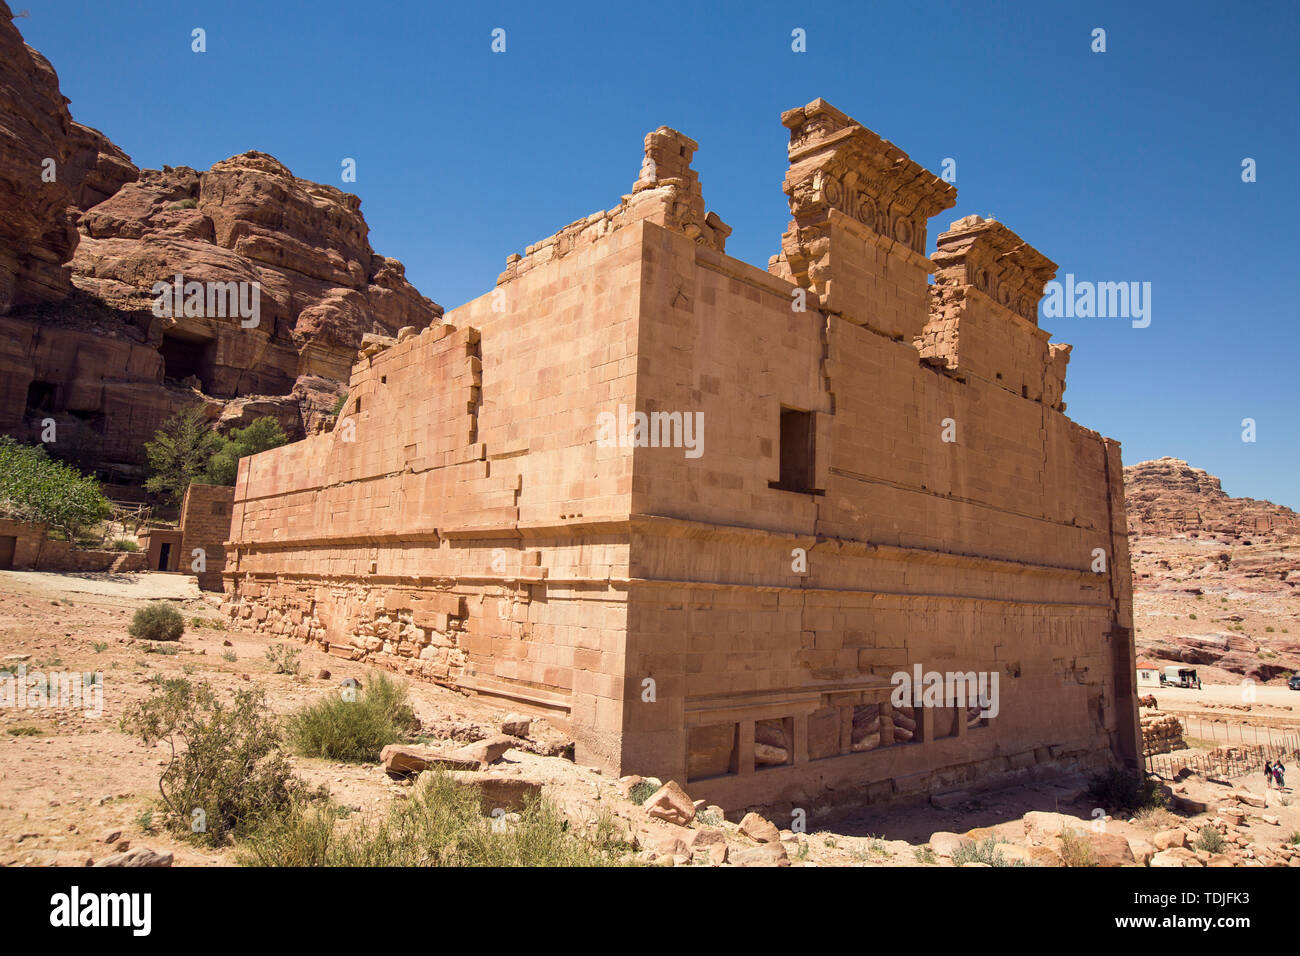 Middle East, Jordan, End of the World, Temple of Petra, relics, sites,  cultural heritage, monuments, history, culture, geomorphology, rocks,  mountains, temples, movies, Lawrence of Arabia, Transformers, Mars Rescue  Stock Photo - Alamy